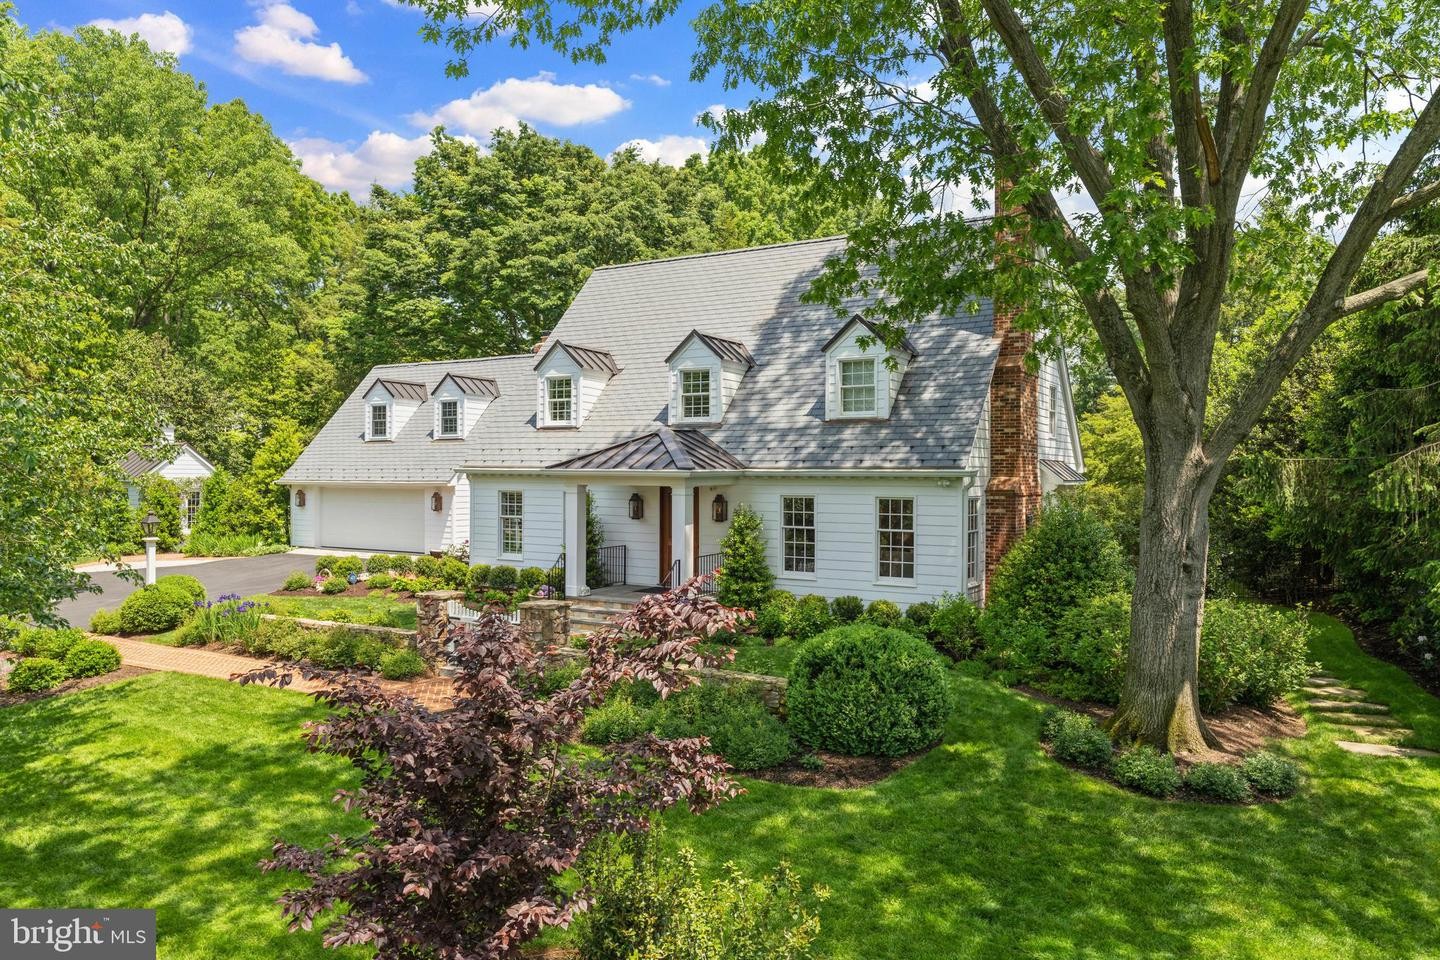 1. 903 Countryside Ct